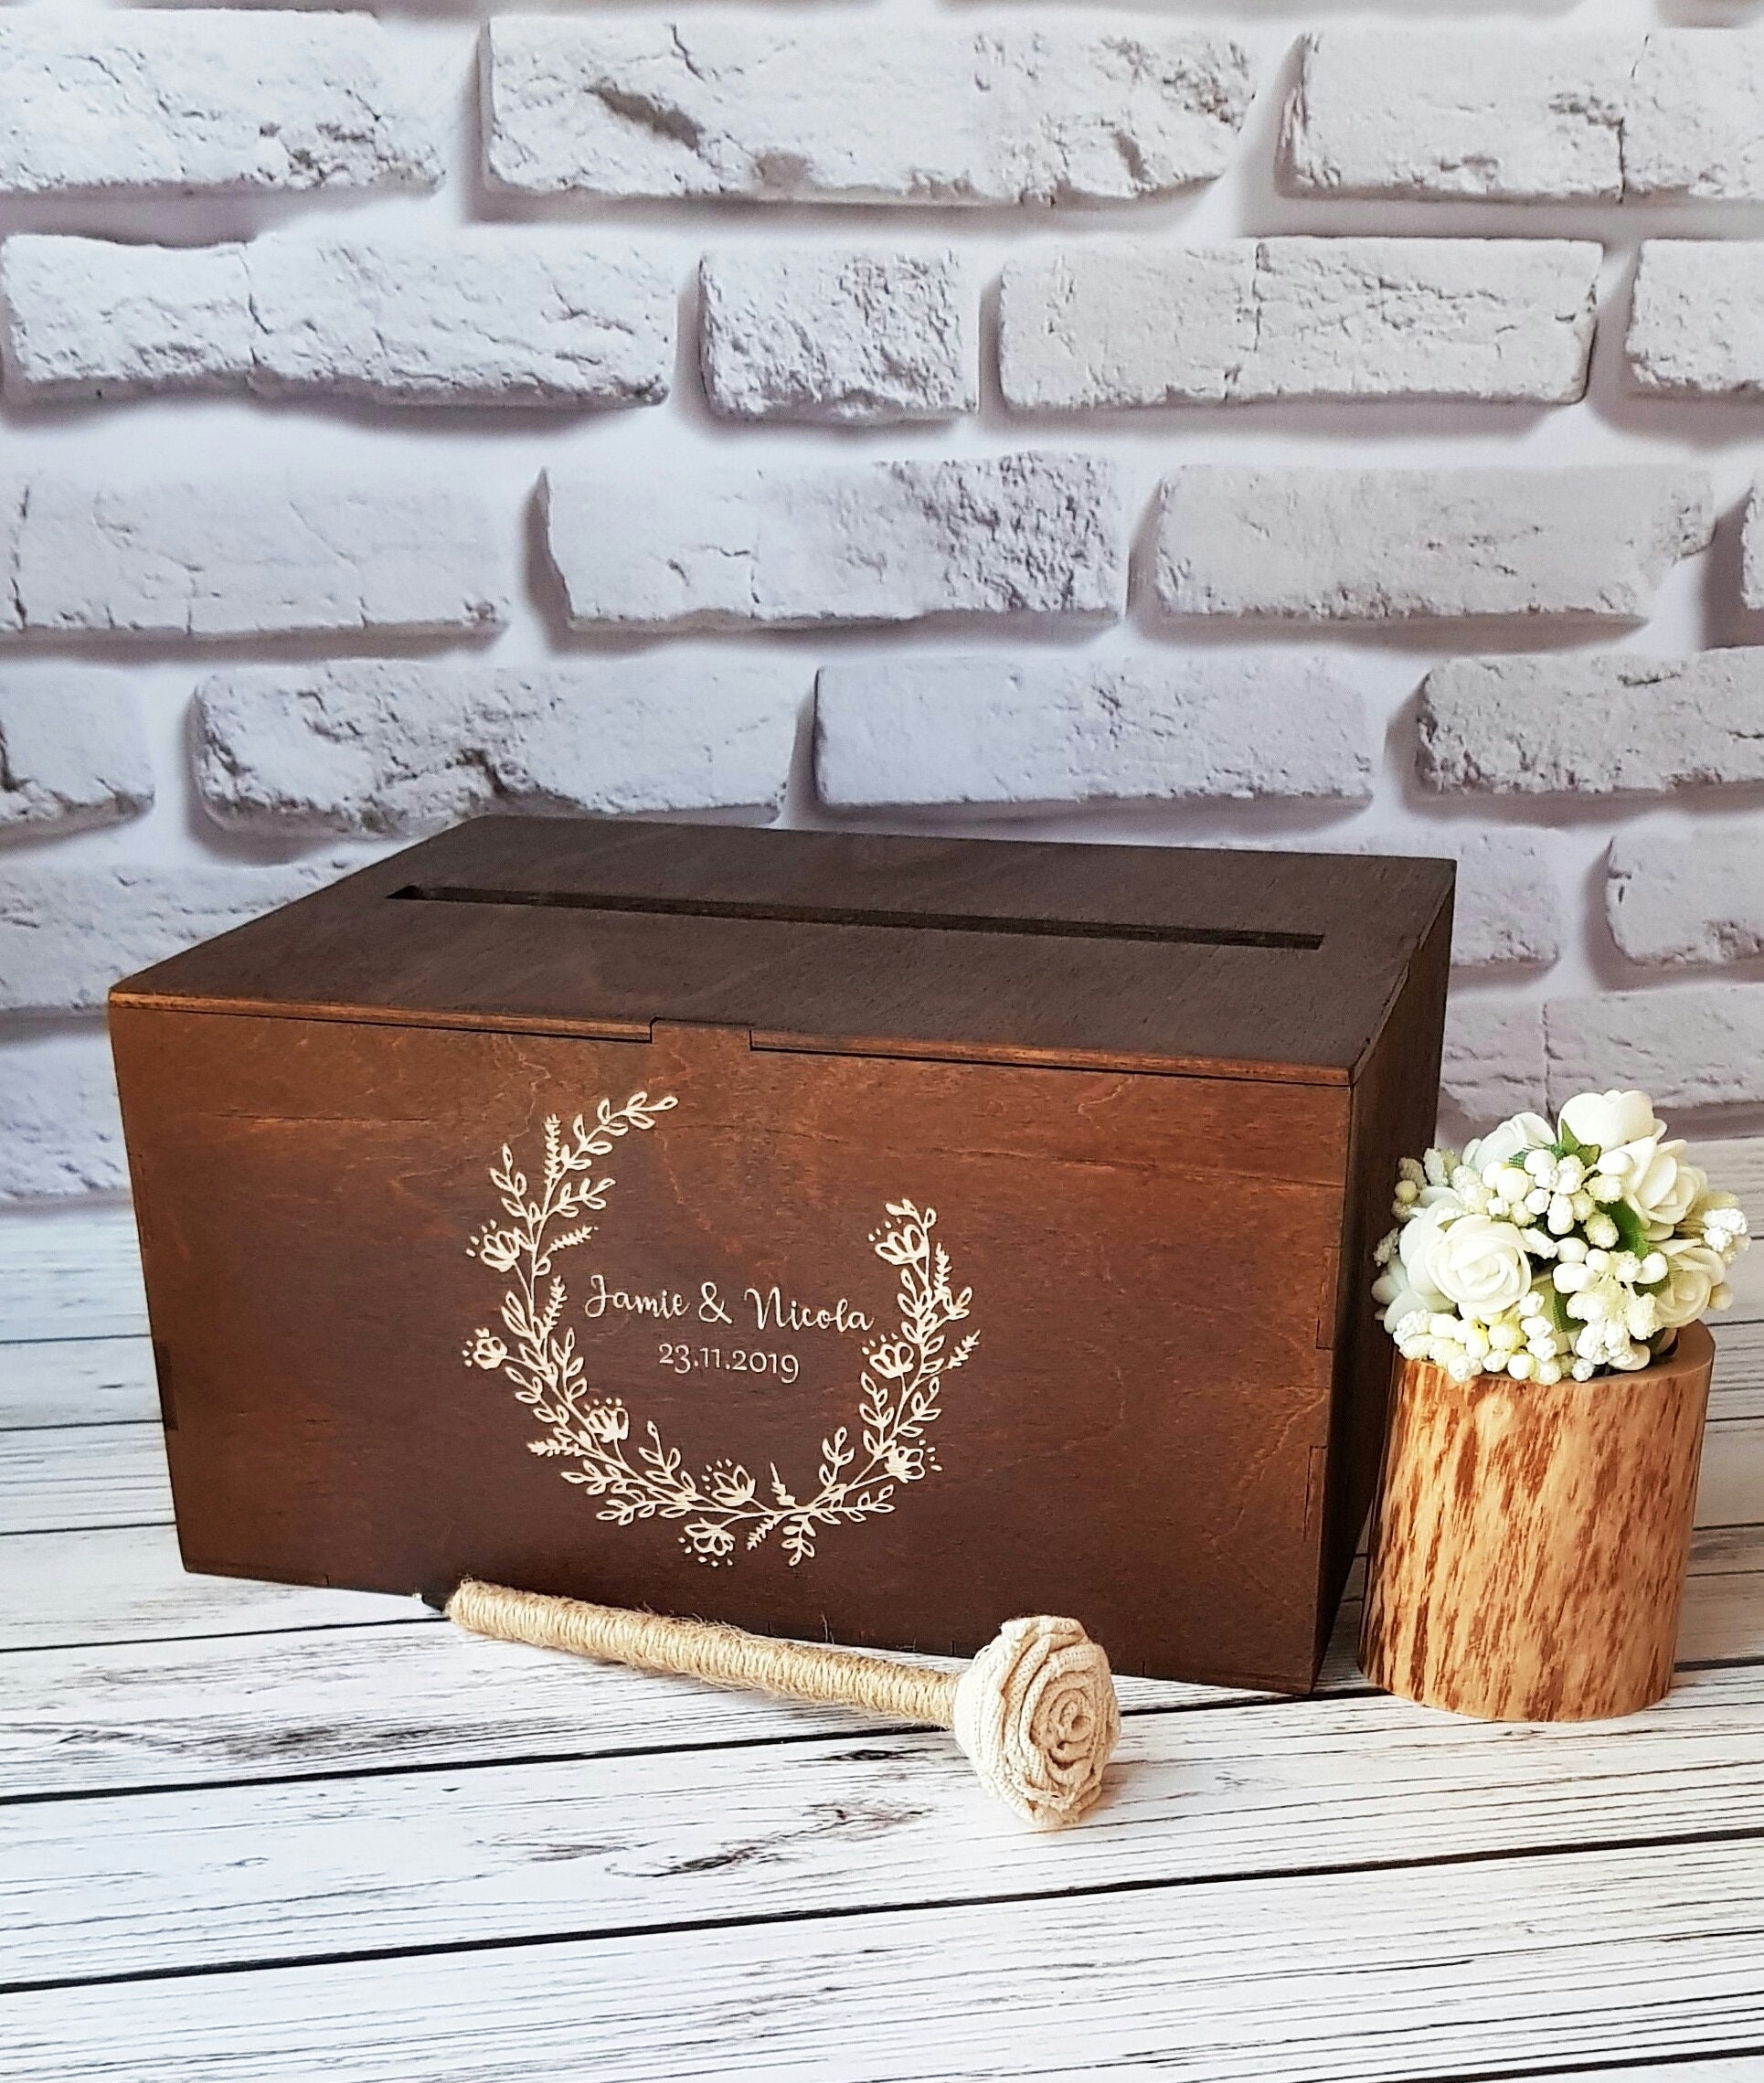 Wedding Gift Card Box Decoration Wooden Card Money Box Case With Lock –  VectorPort